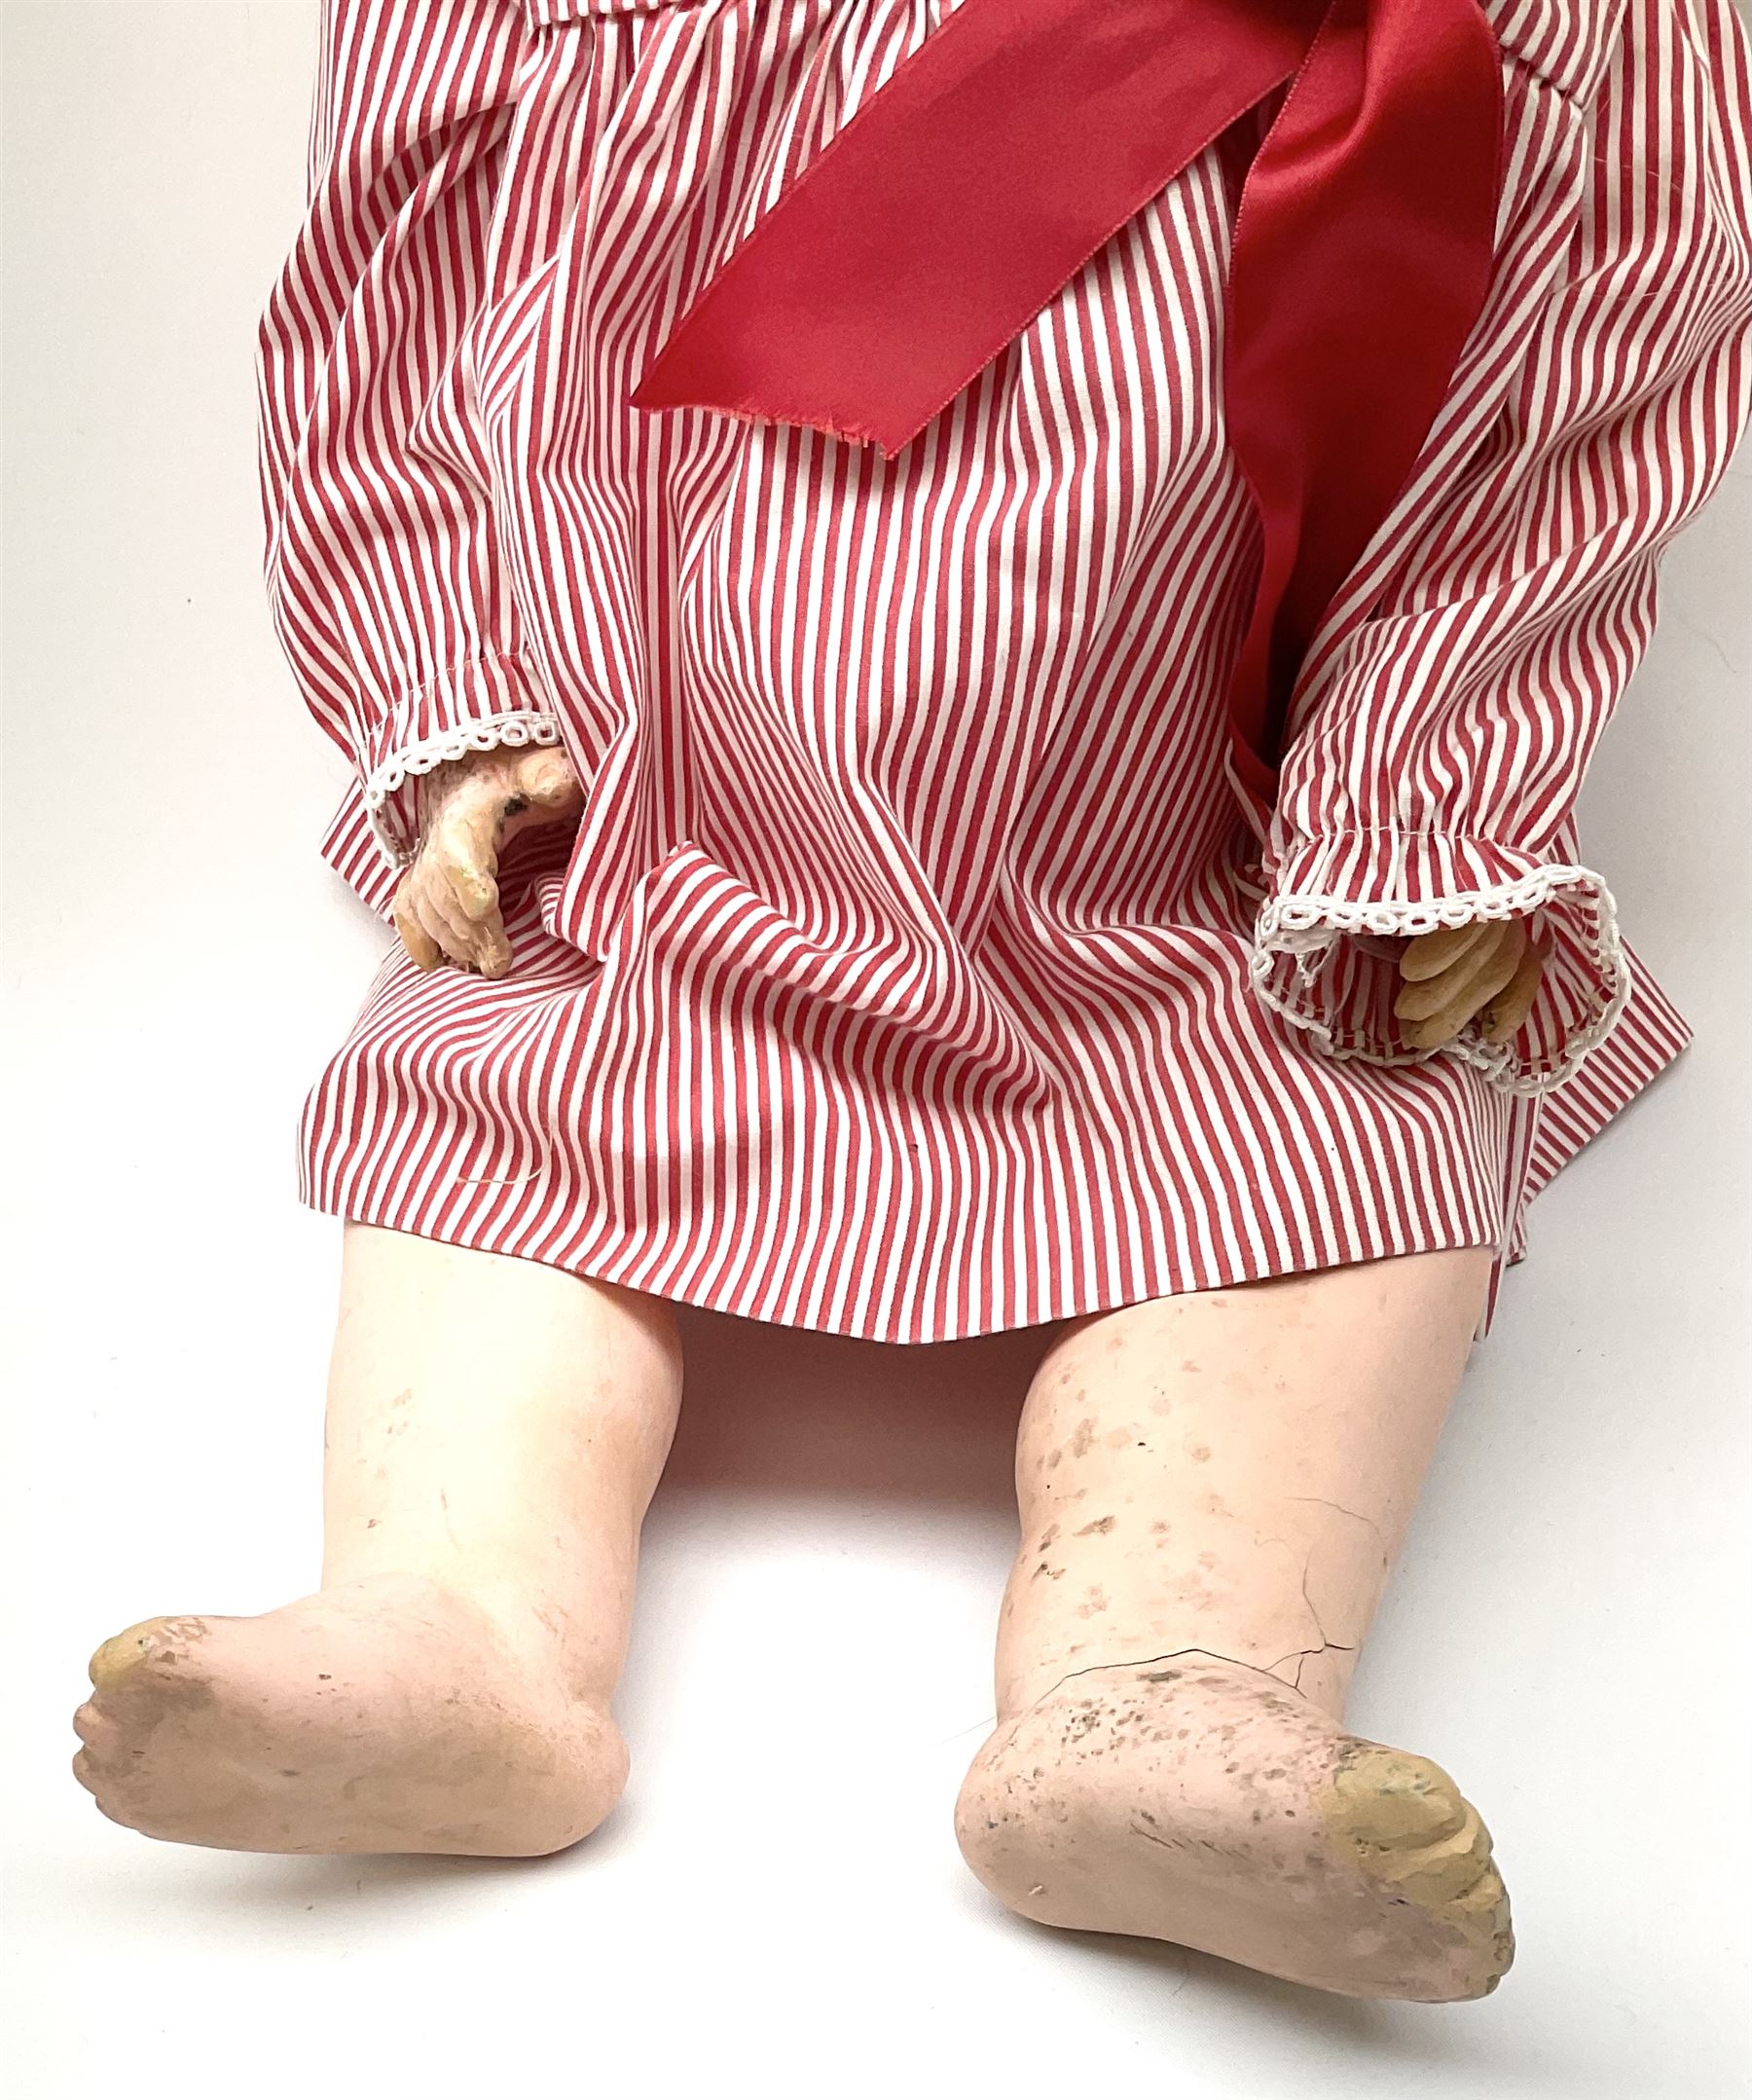 Armand Marseille Koppelsdorf bisque head doll with applied hair - Image 13 of 17